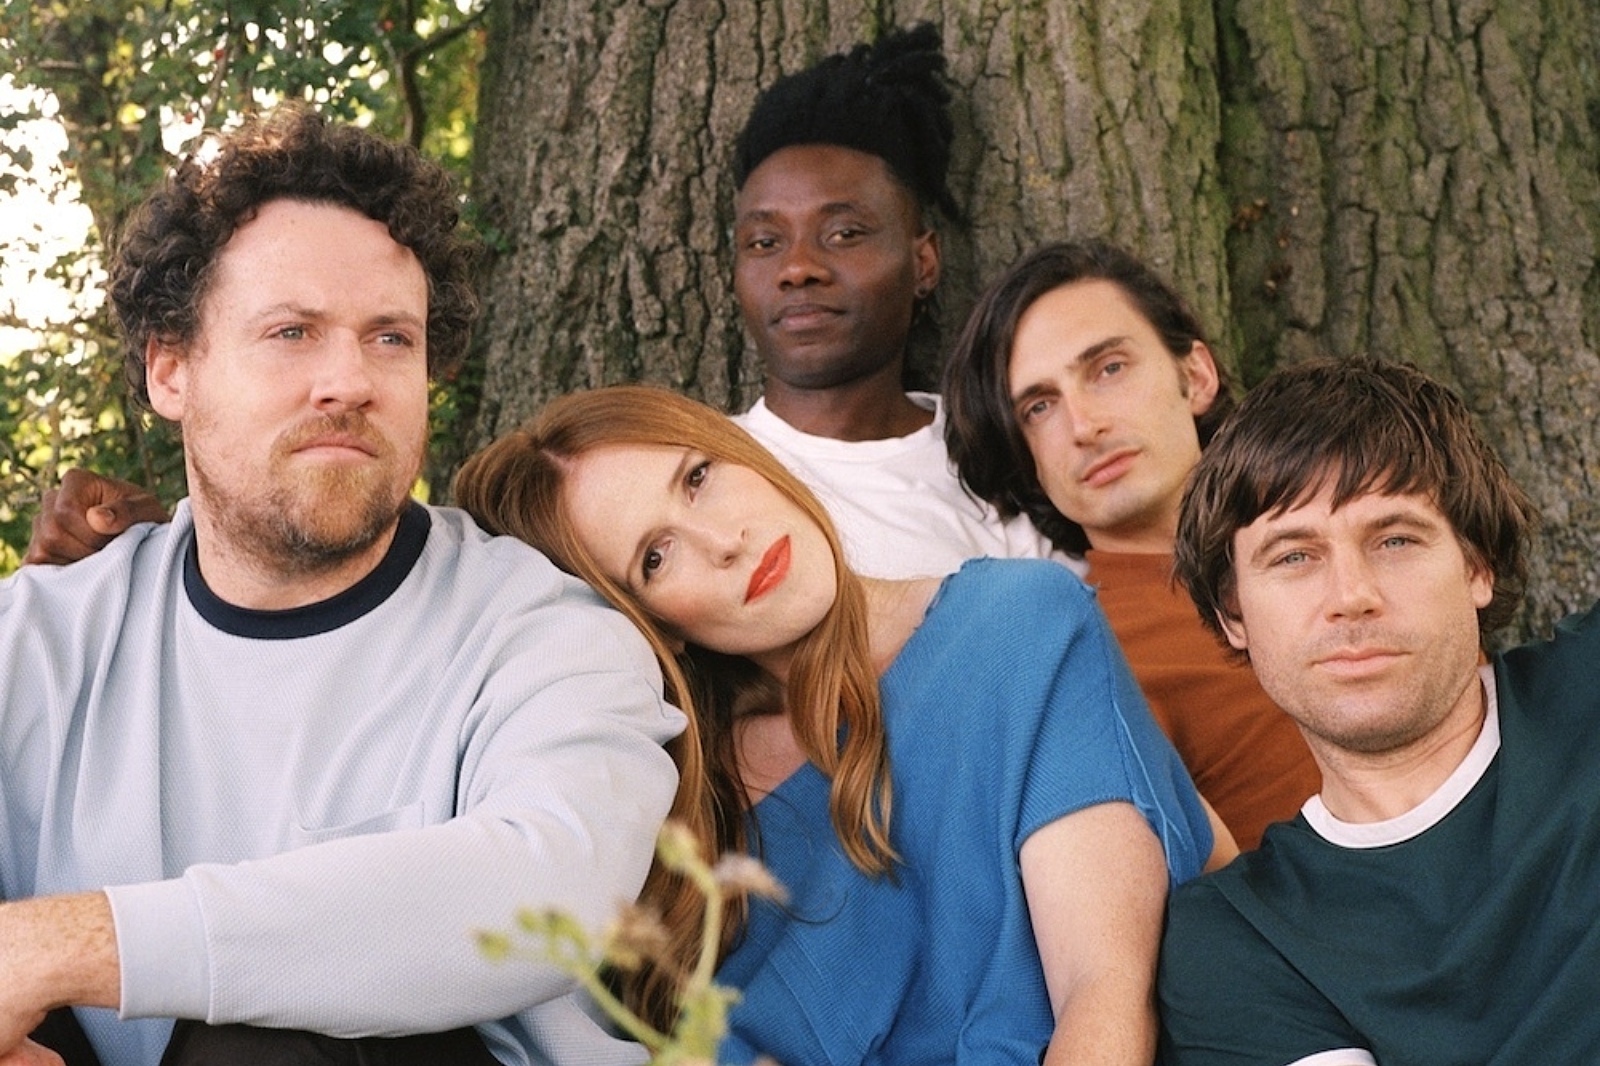 Metronomy link up with Jessica Winter for new version of 'I Lost My Mind'